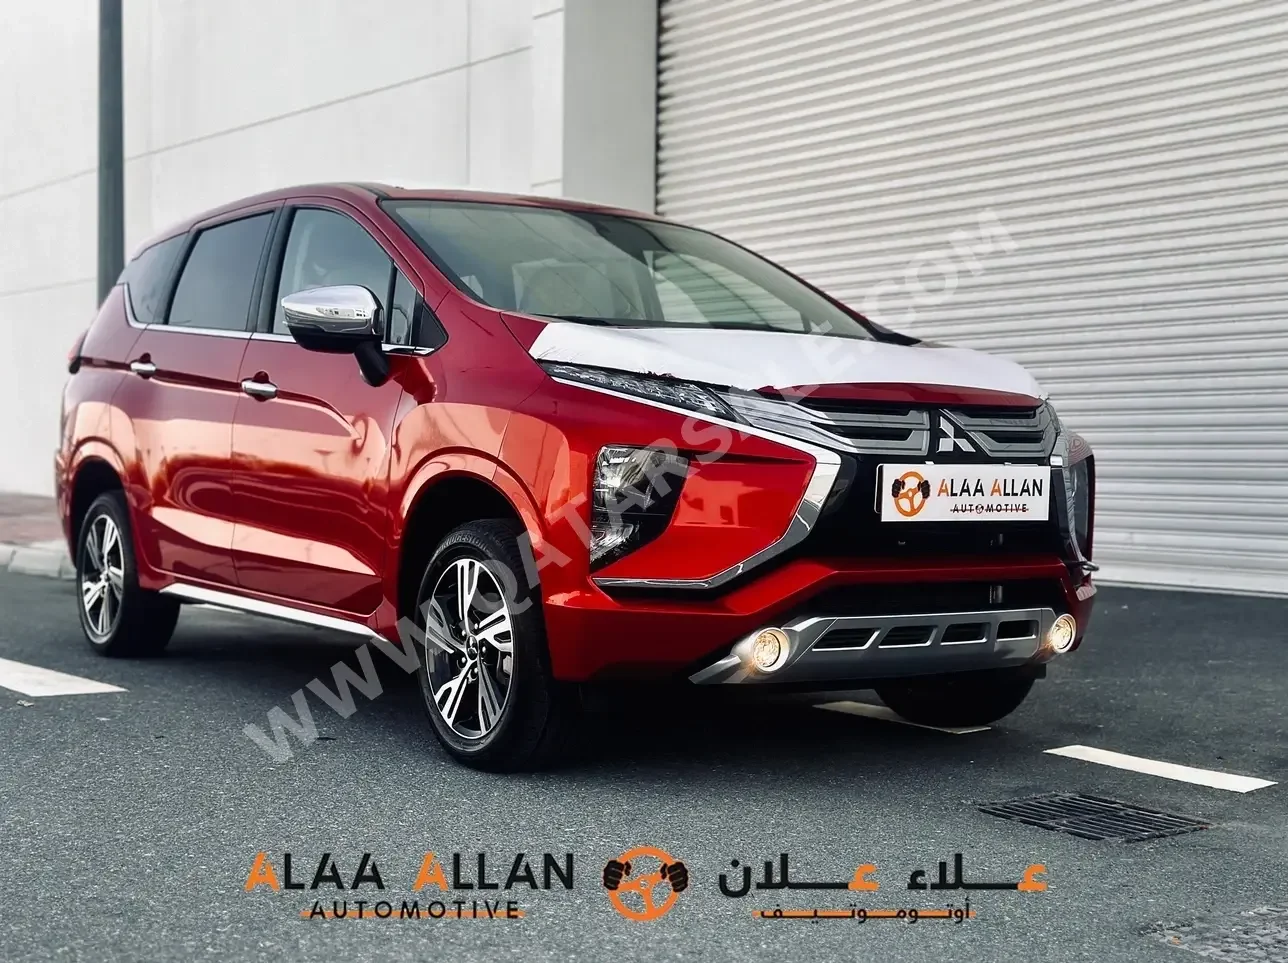 Mitsubishi  Xpander  2022  Automatic  0 Km  4 Cylinder  Front Wheel Drive (FWD)  SUV  Red  With Warranty